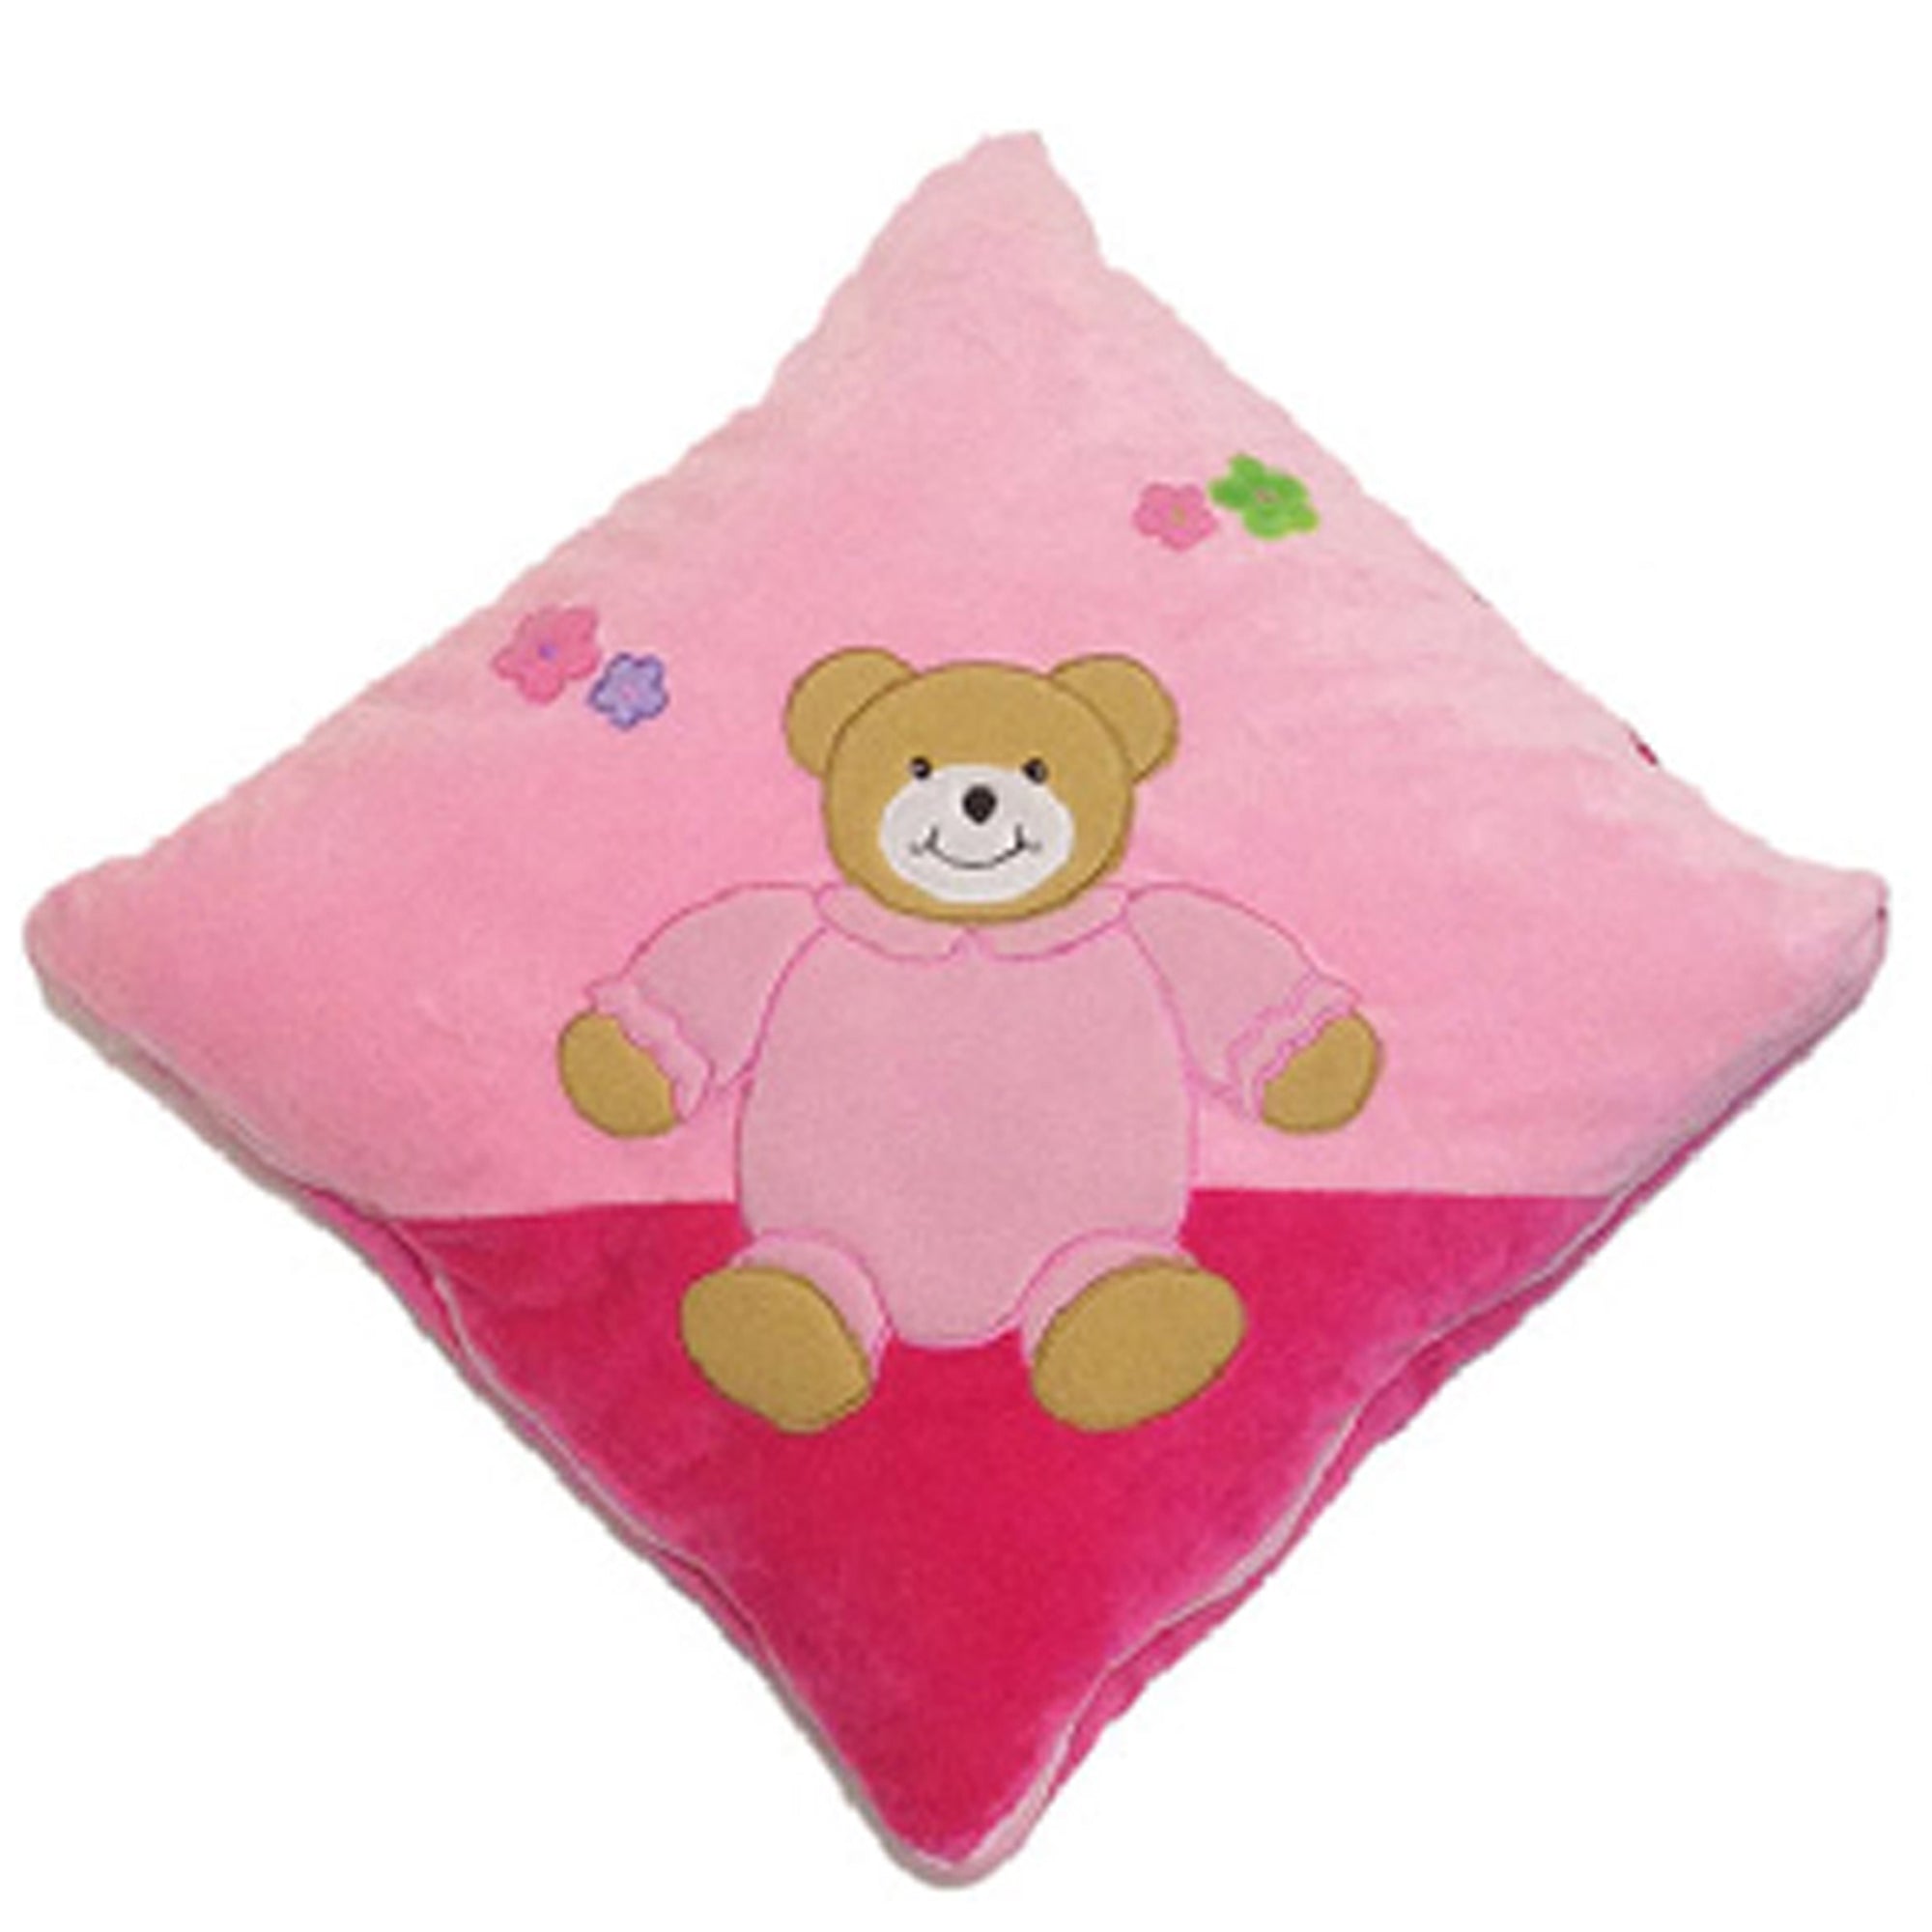 Personalised Baby blanket/Pillow (Quillow) - Personalise It